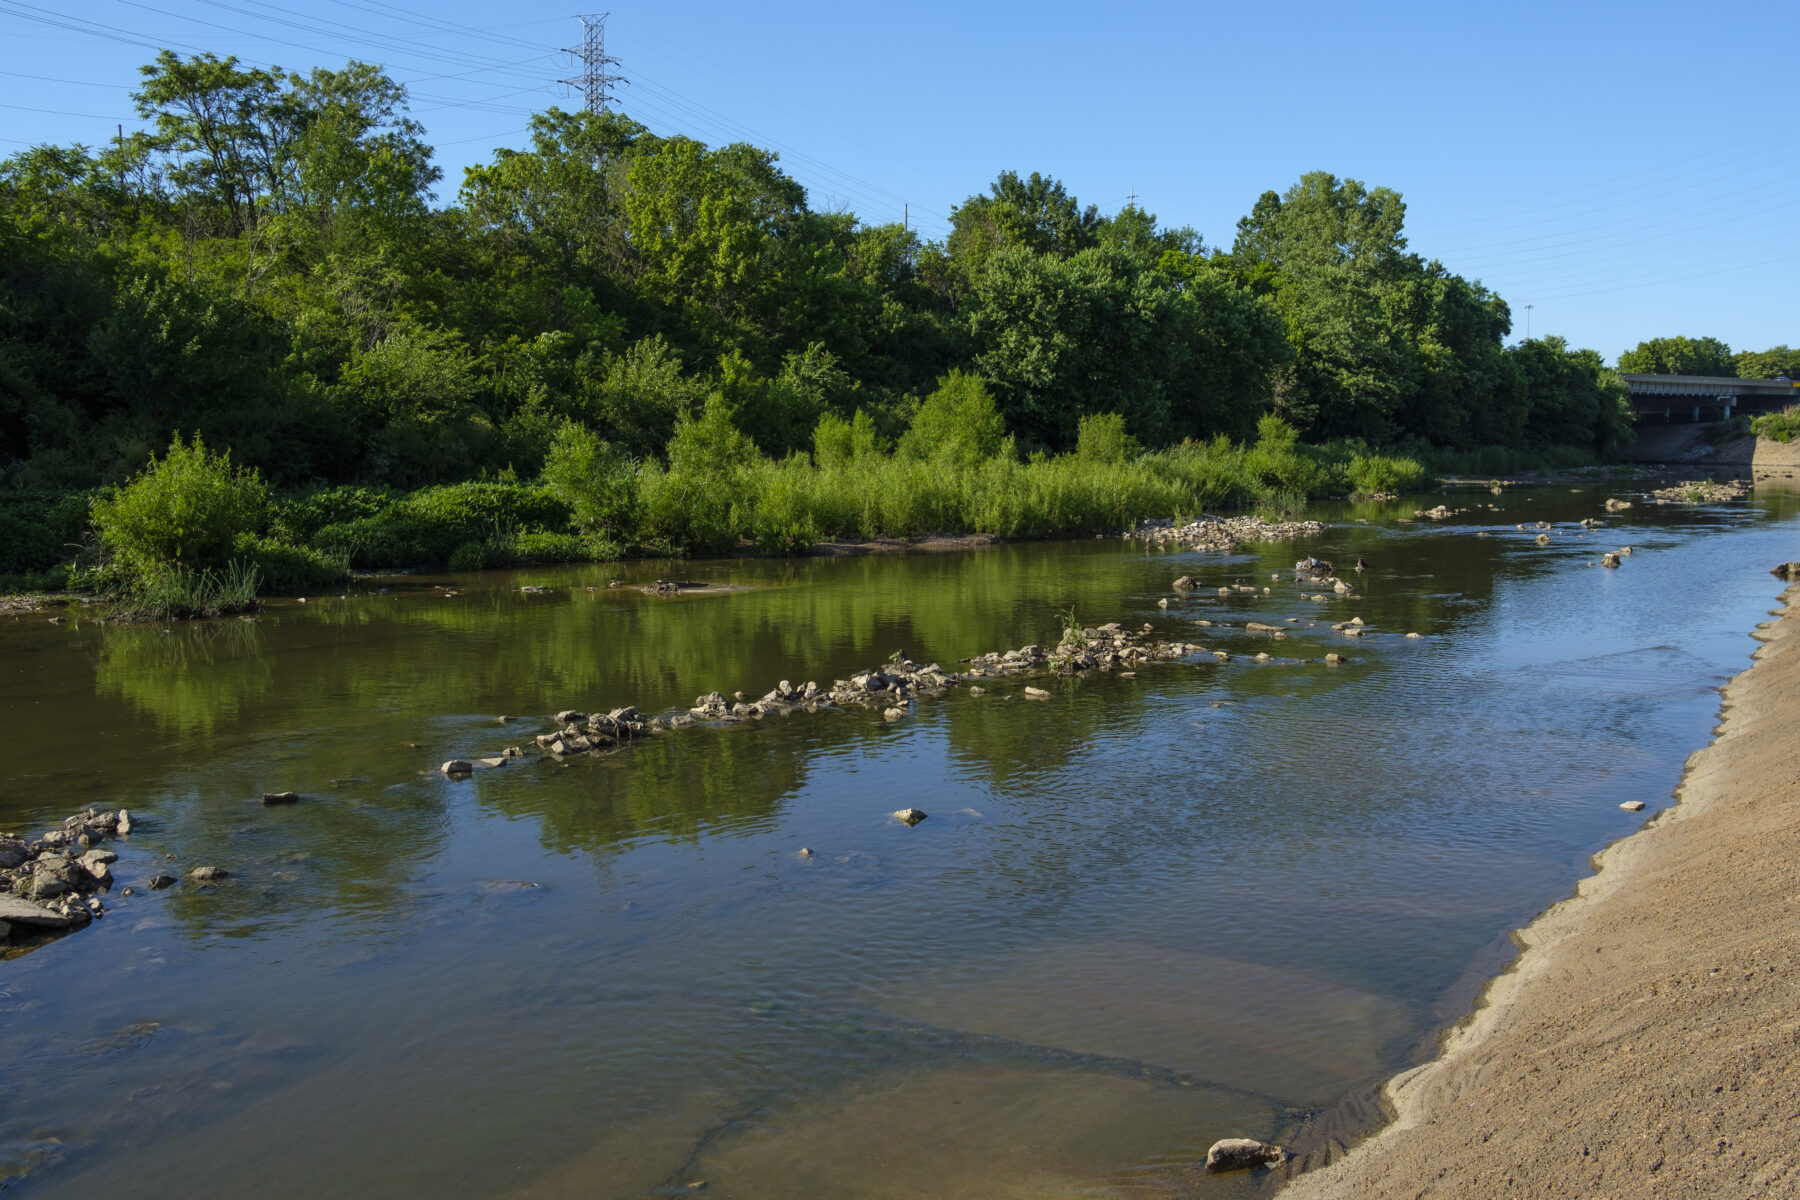 A successful wetland portion along the River des Peres.